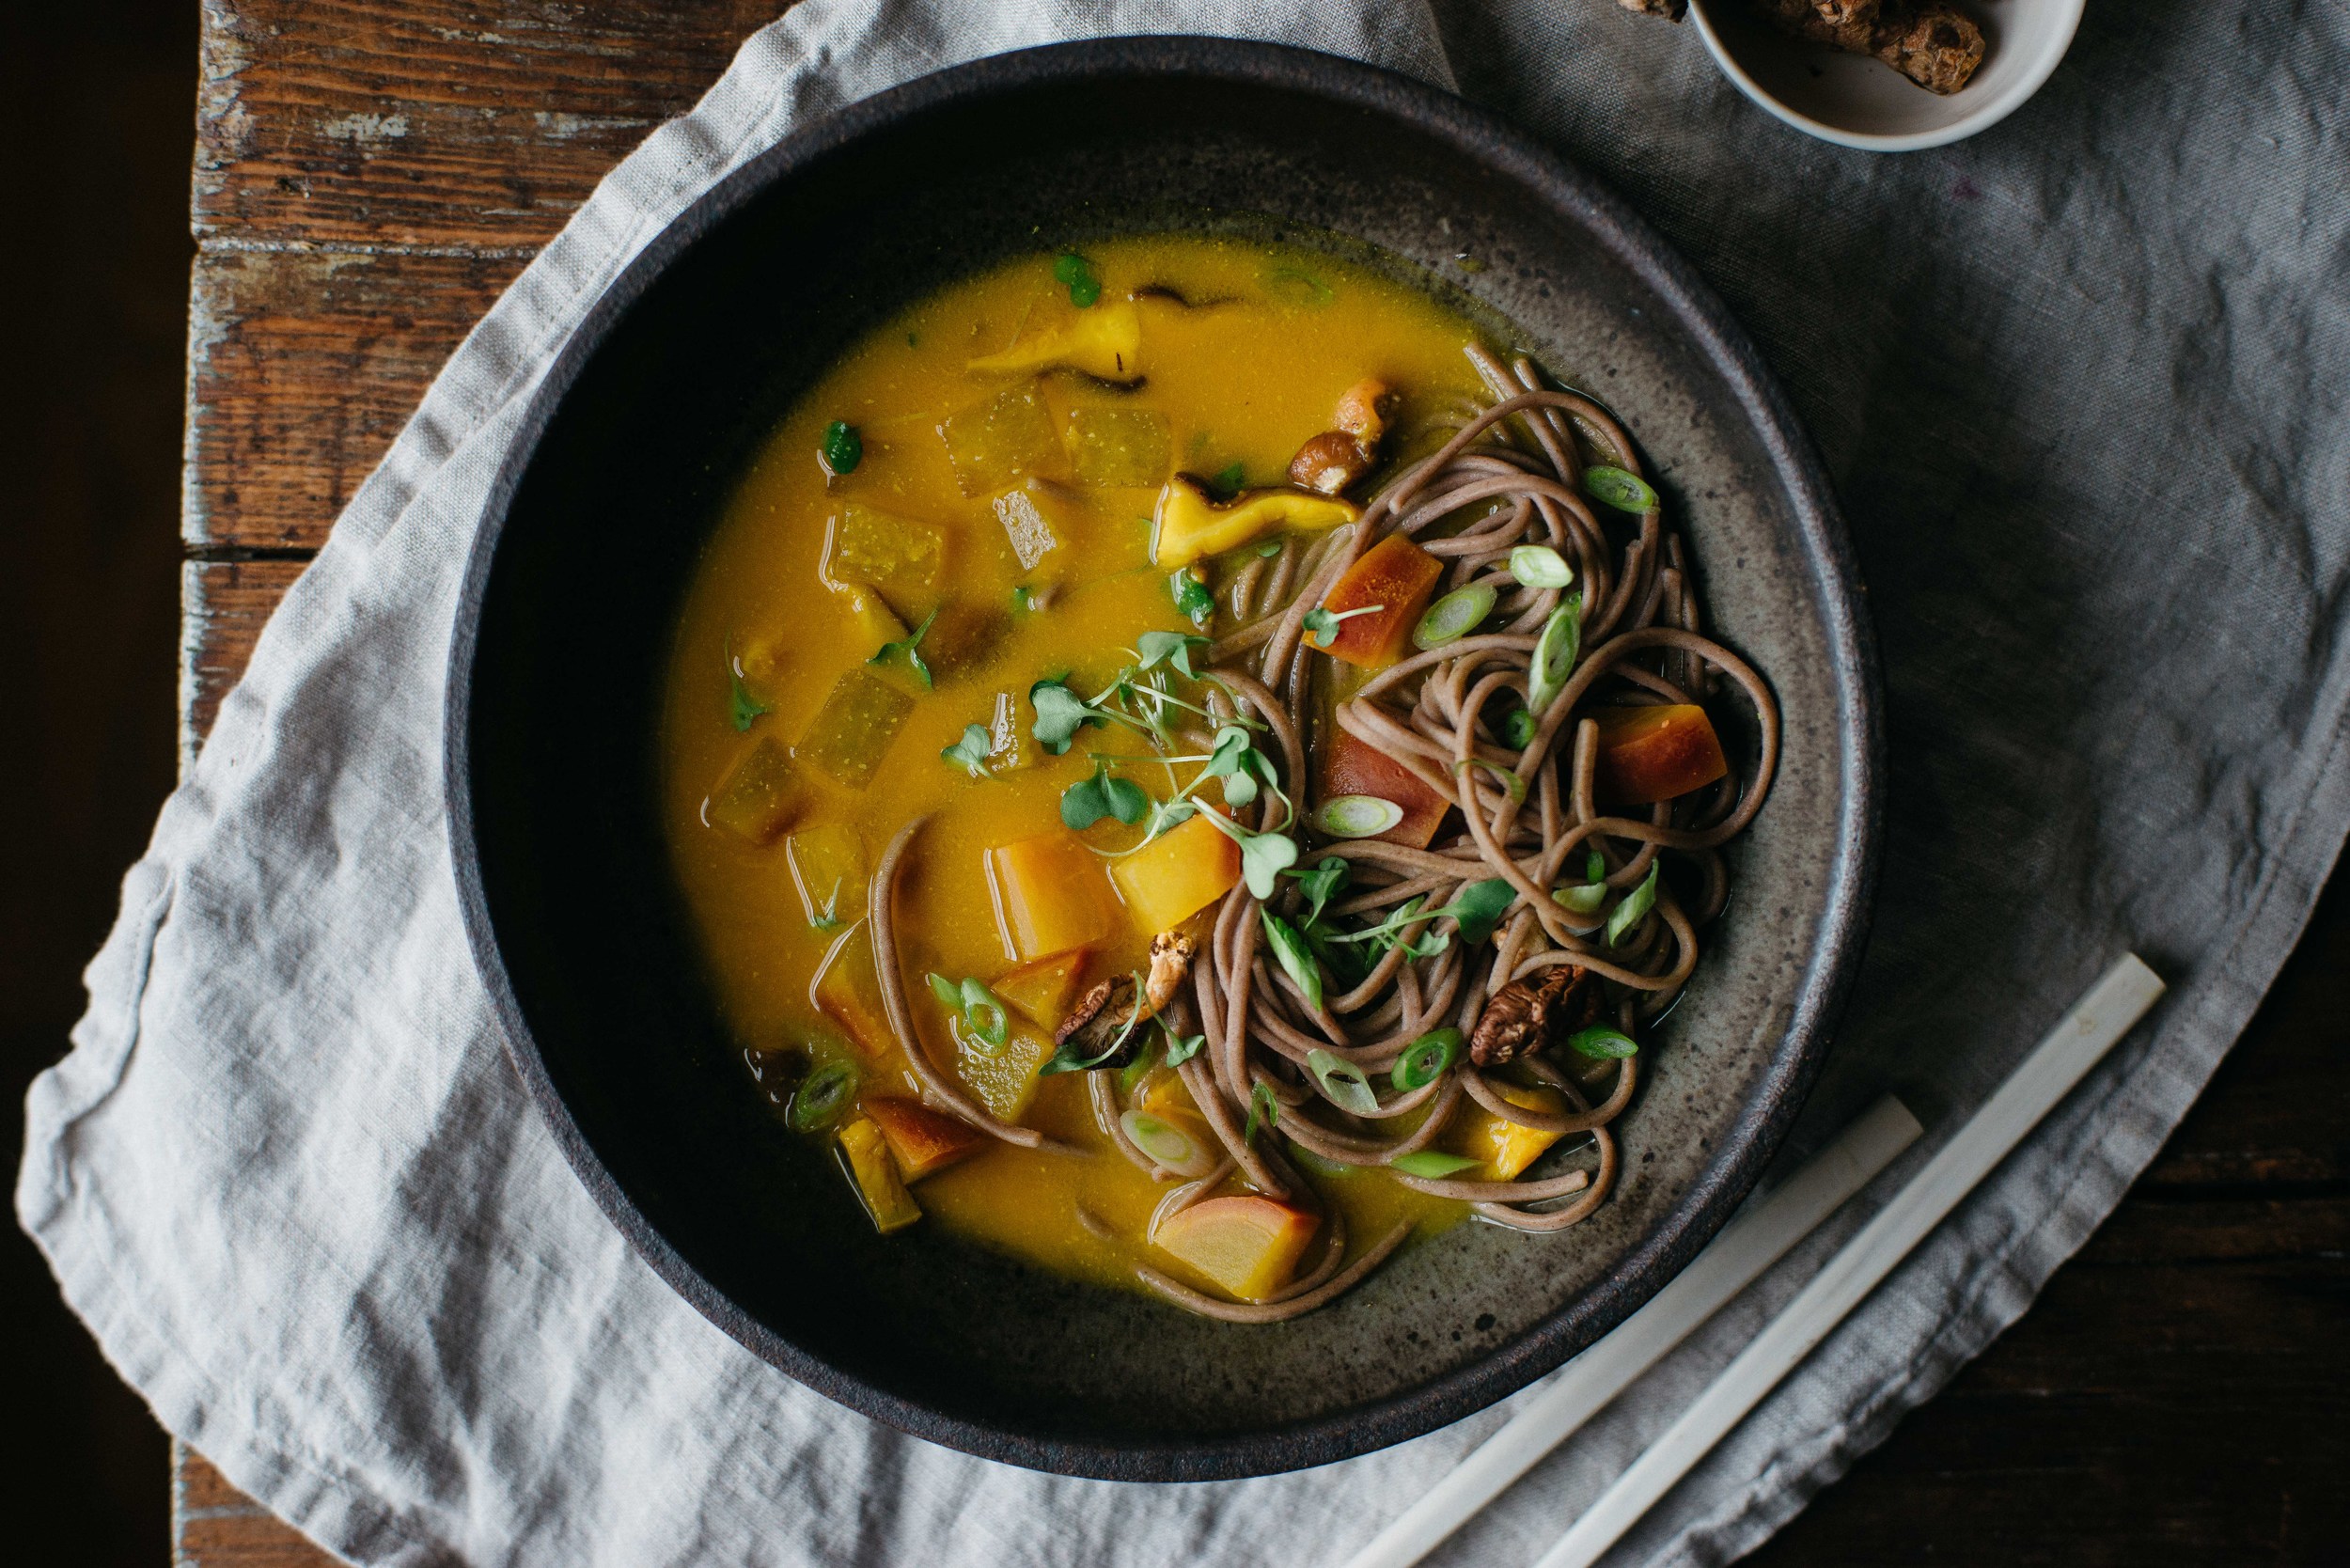 turmeric-miso soup w/ shiitakes, turnips + soba noodles — dolly and oatmeal